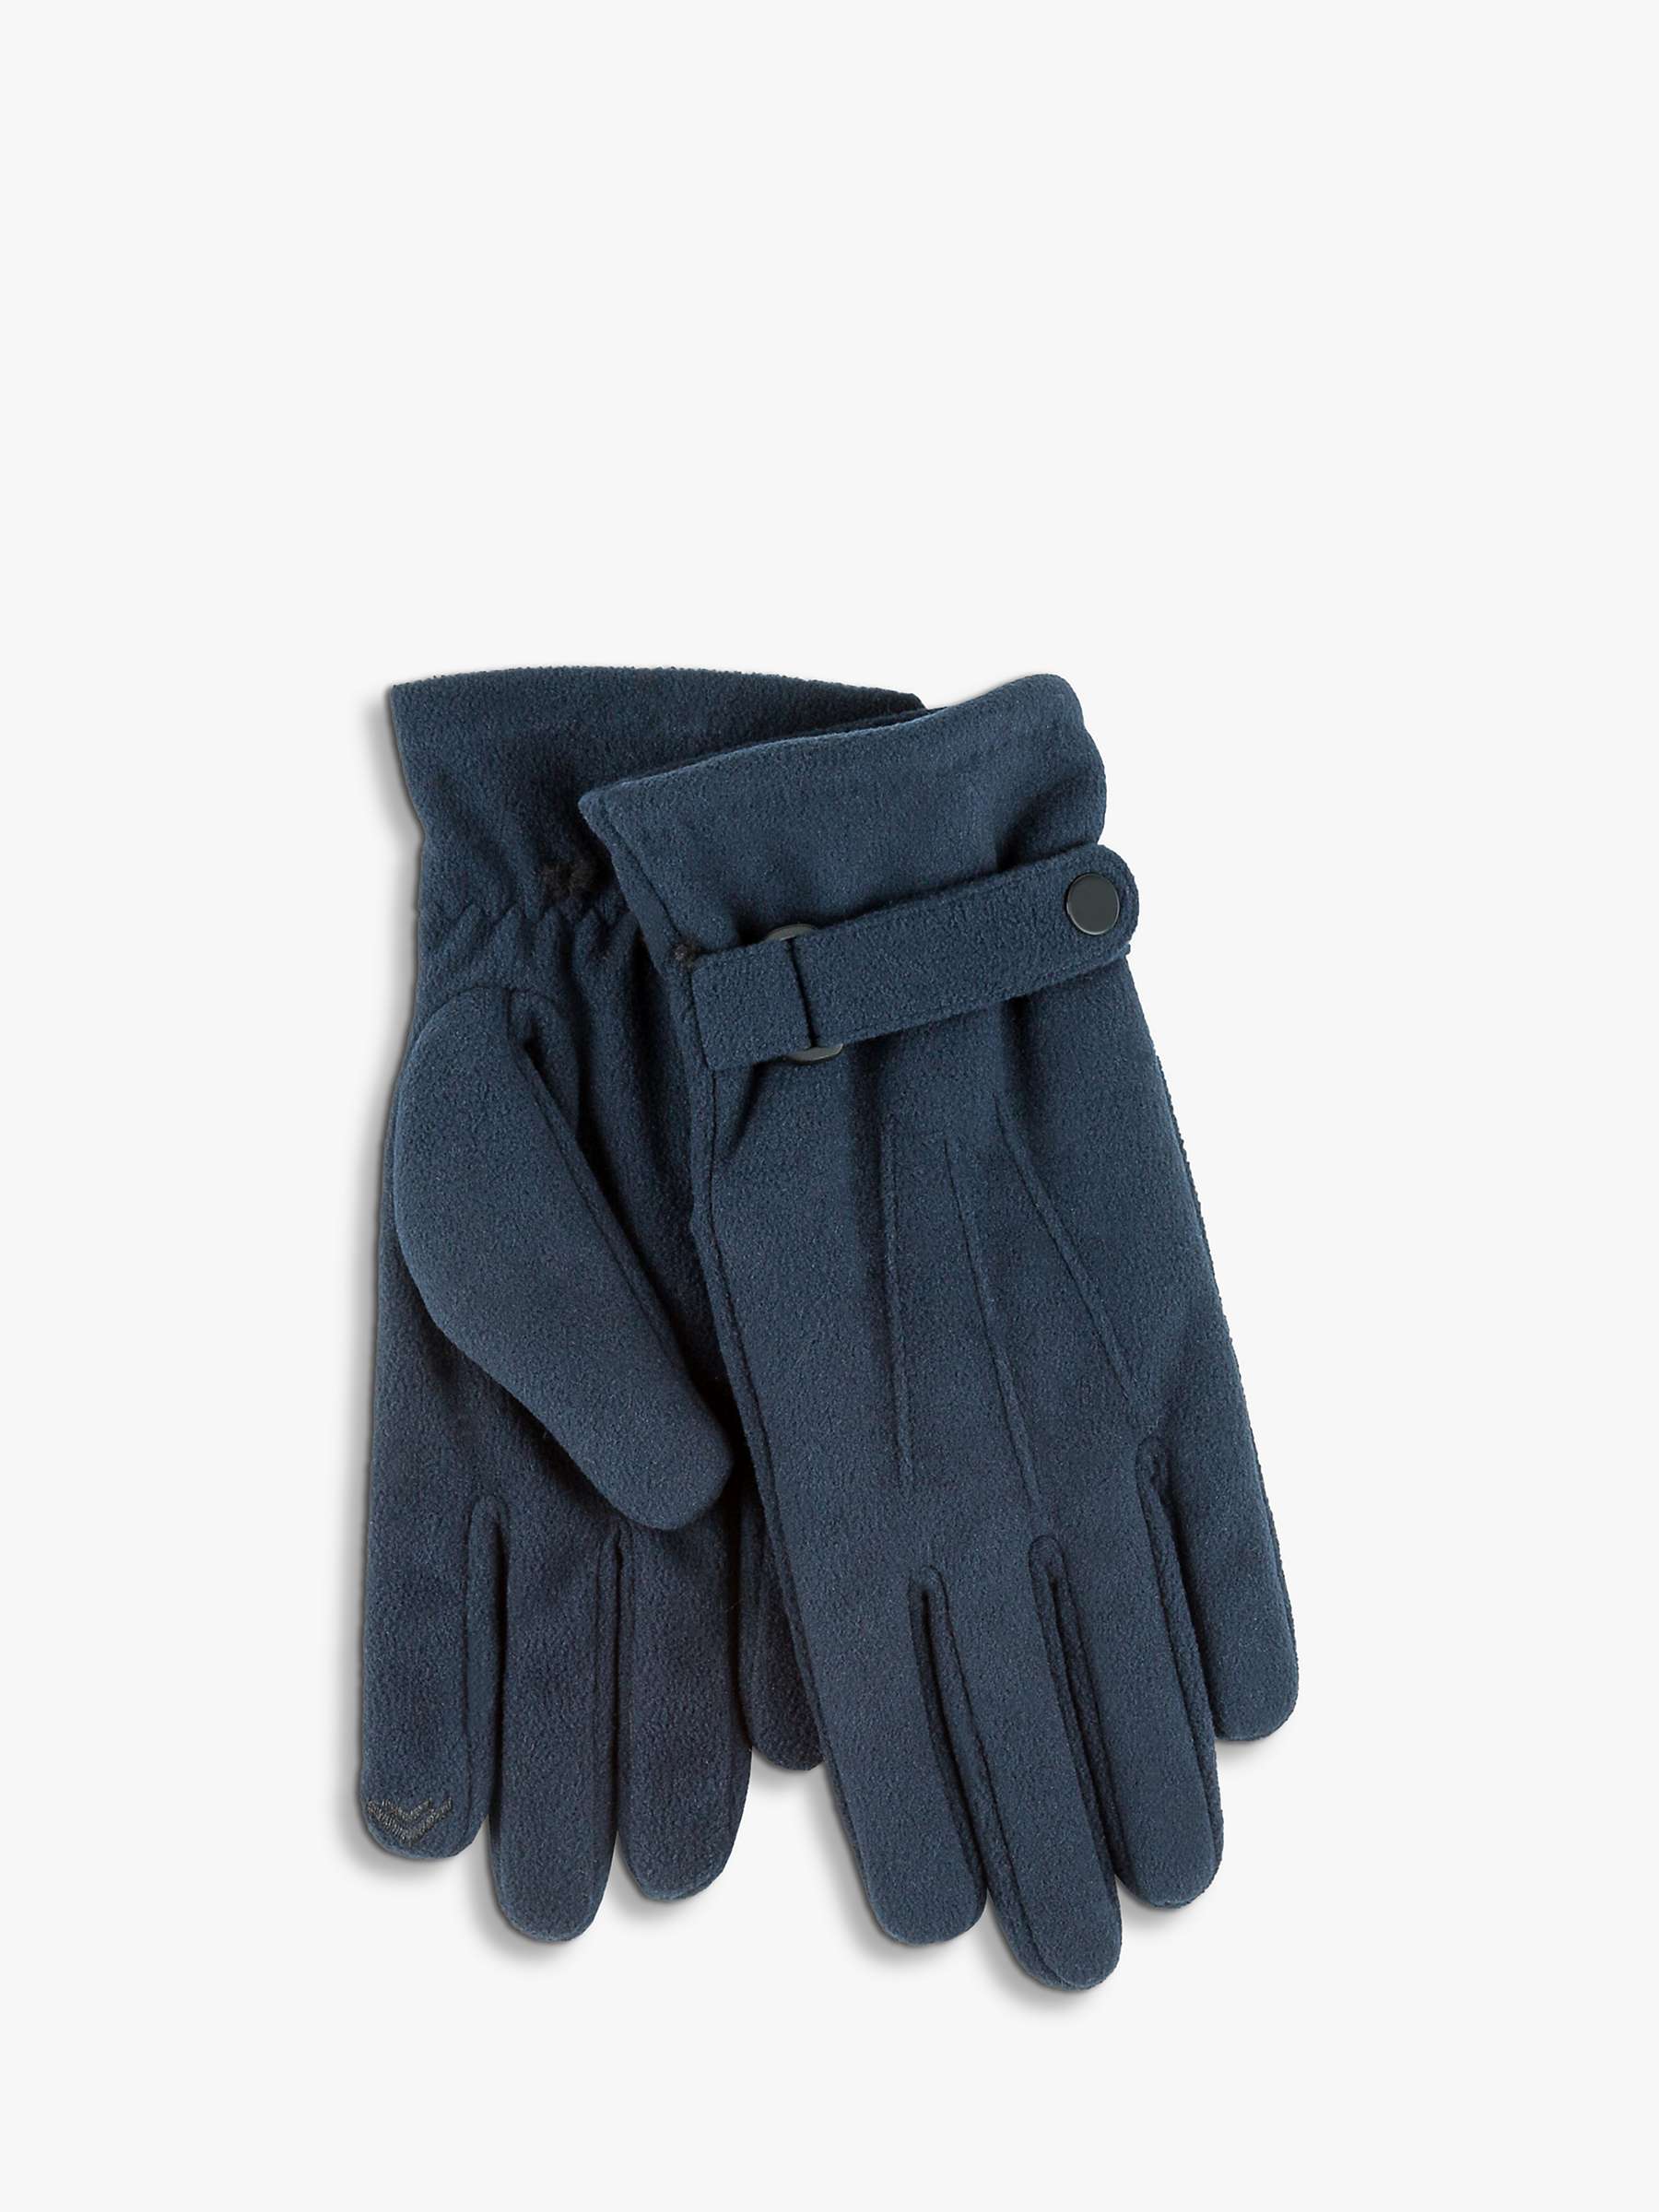 Buy totes Fleece Smartouch Gloves Online at johnlewis.com